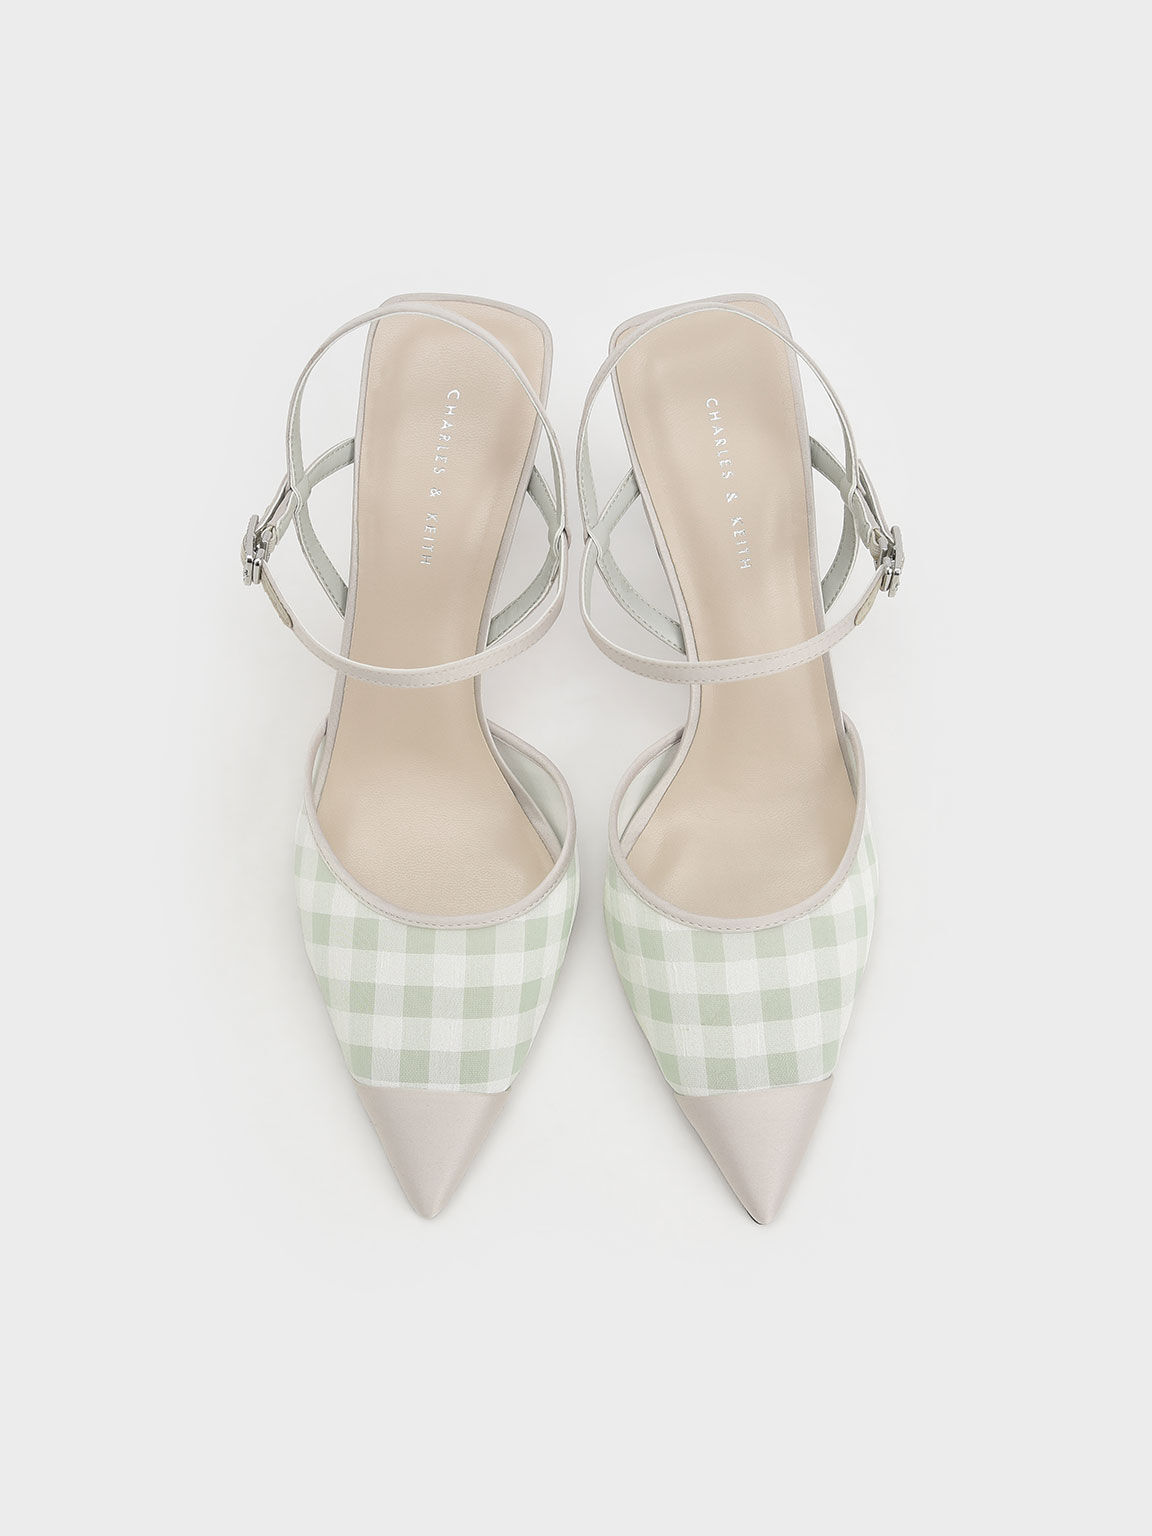 Satin & Check-Print Fabric Ankle-Strap Pumps, Light Green, hi-res